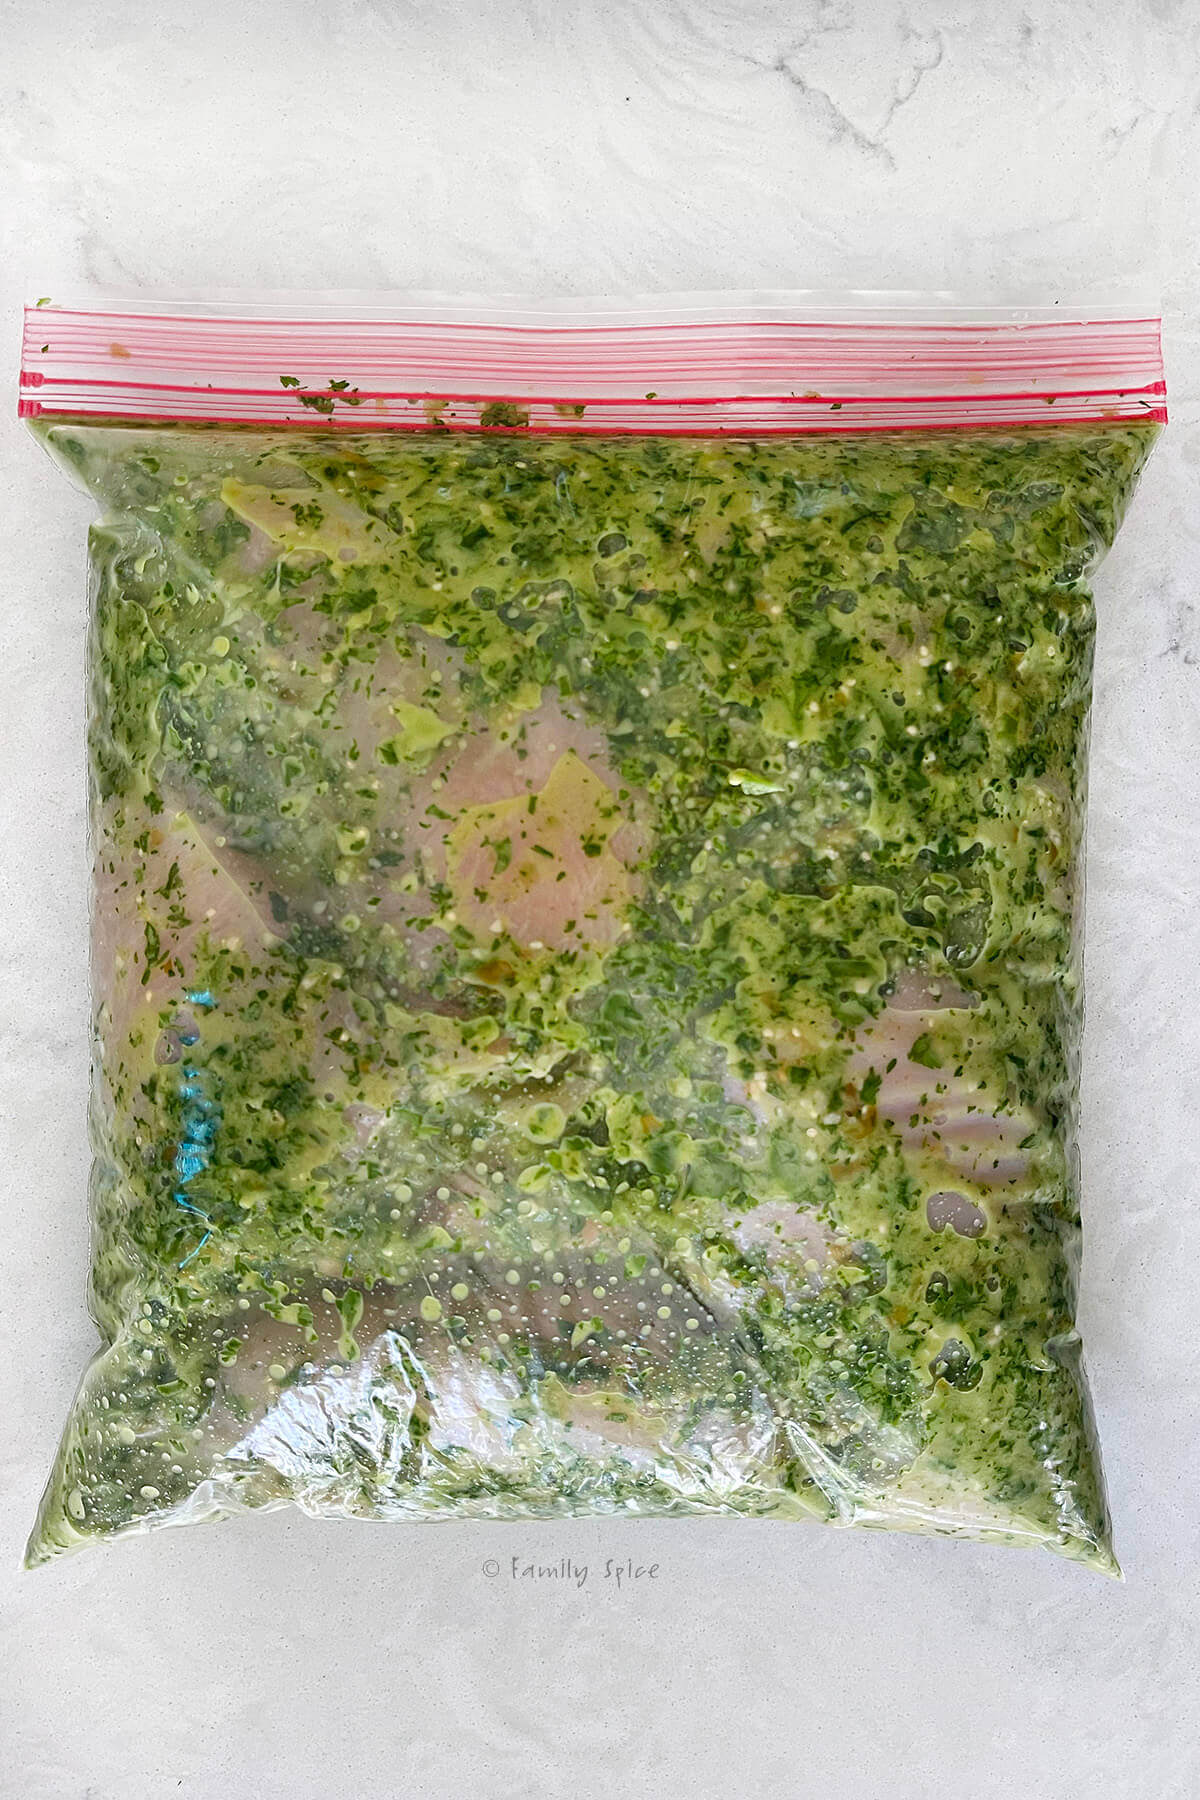 A large resealable bag closed with raw chicken breast with chile verde marinade mixed together